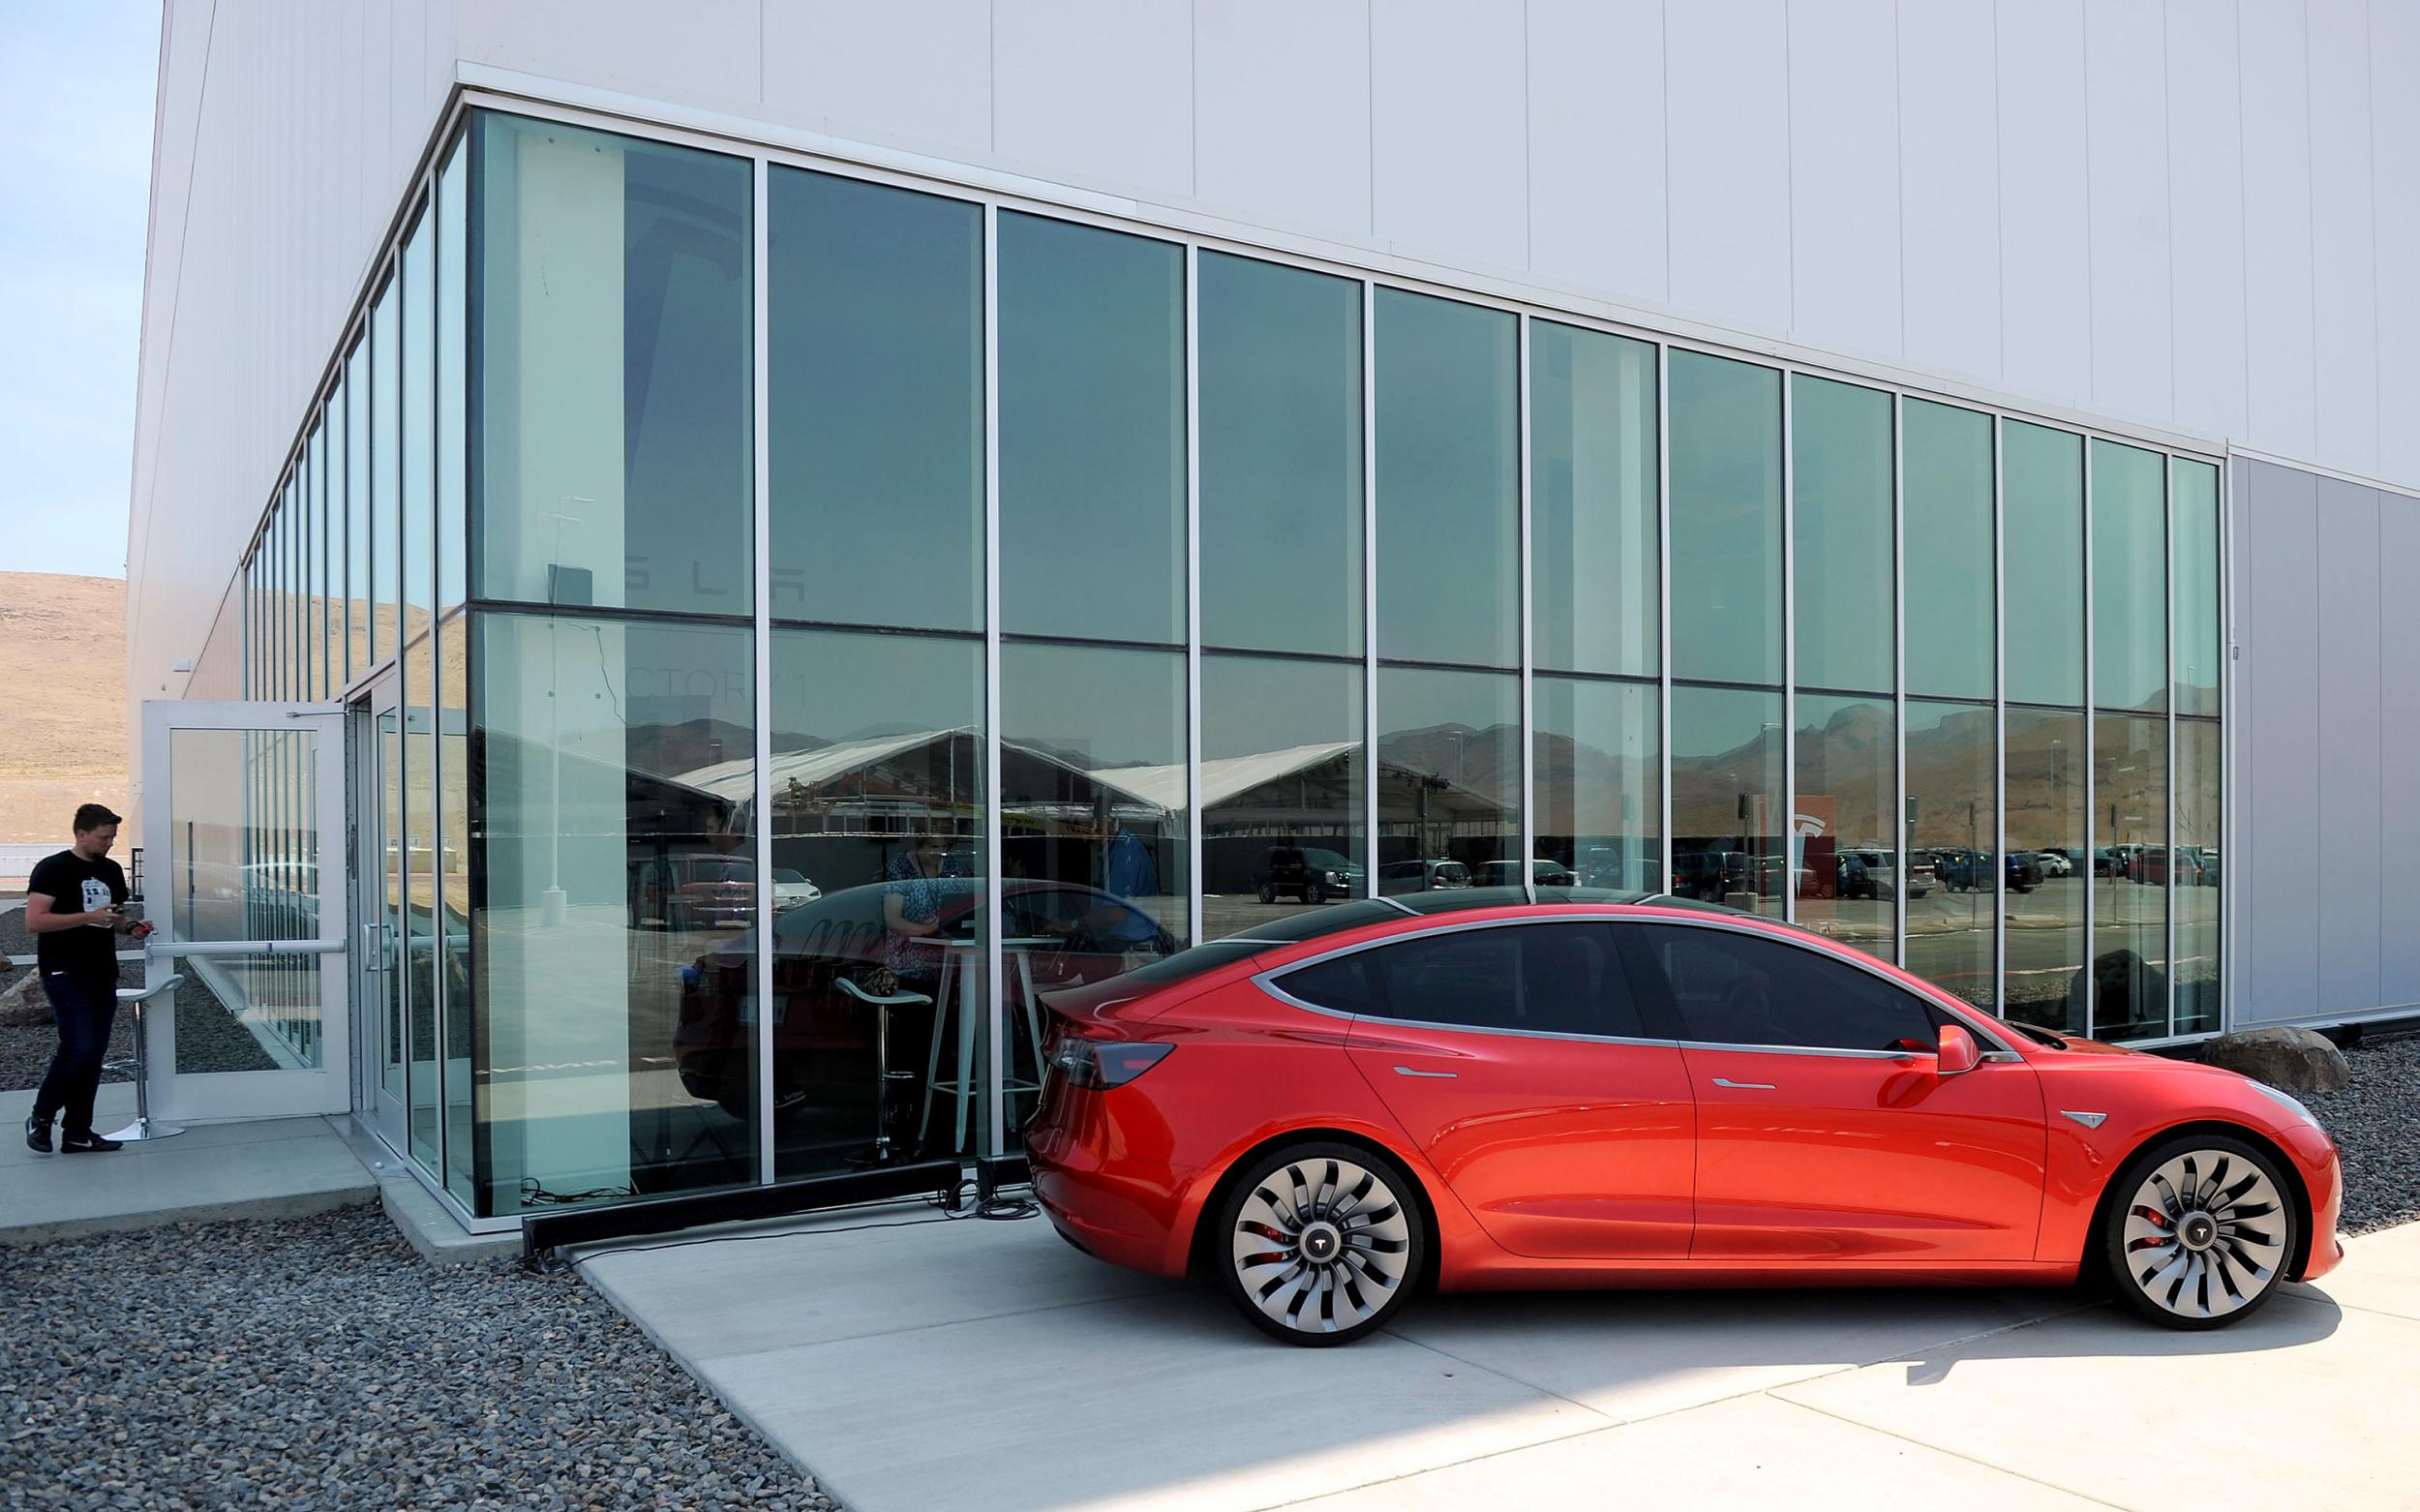 Tesla rolled out the Model 3, made for the mass market, in July